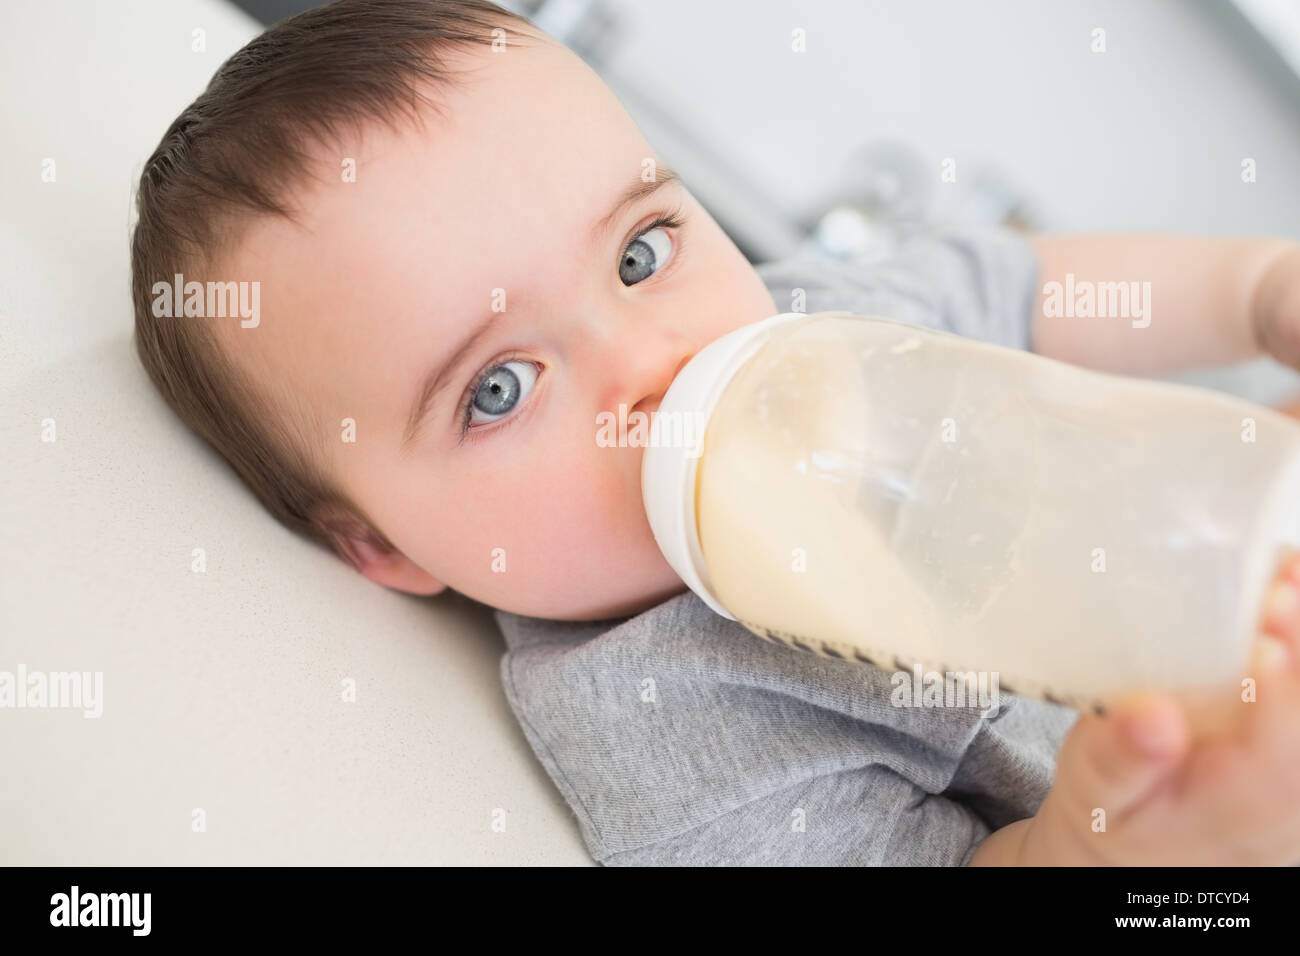 Baby drinking milk while lying on counter Stock Photo